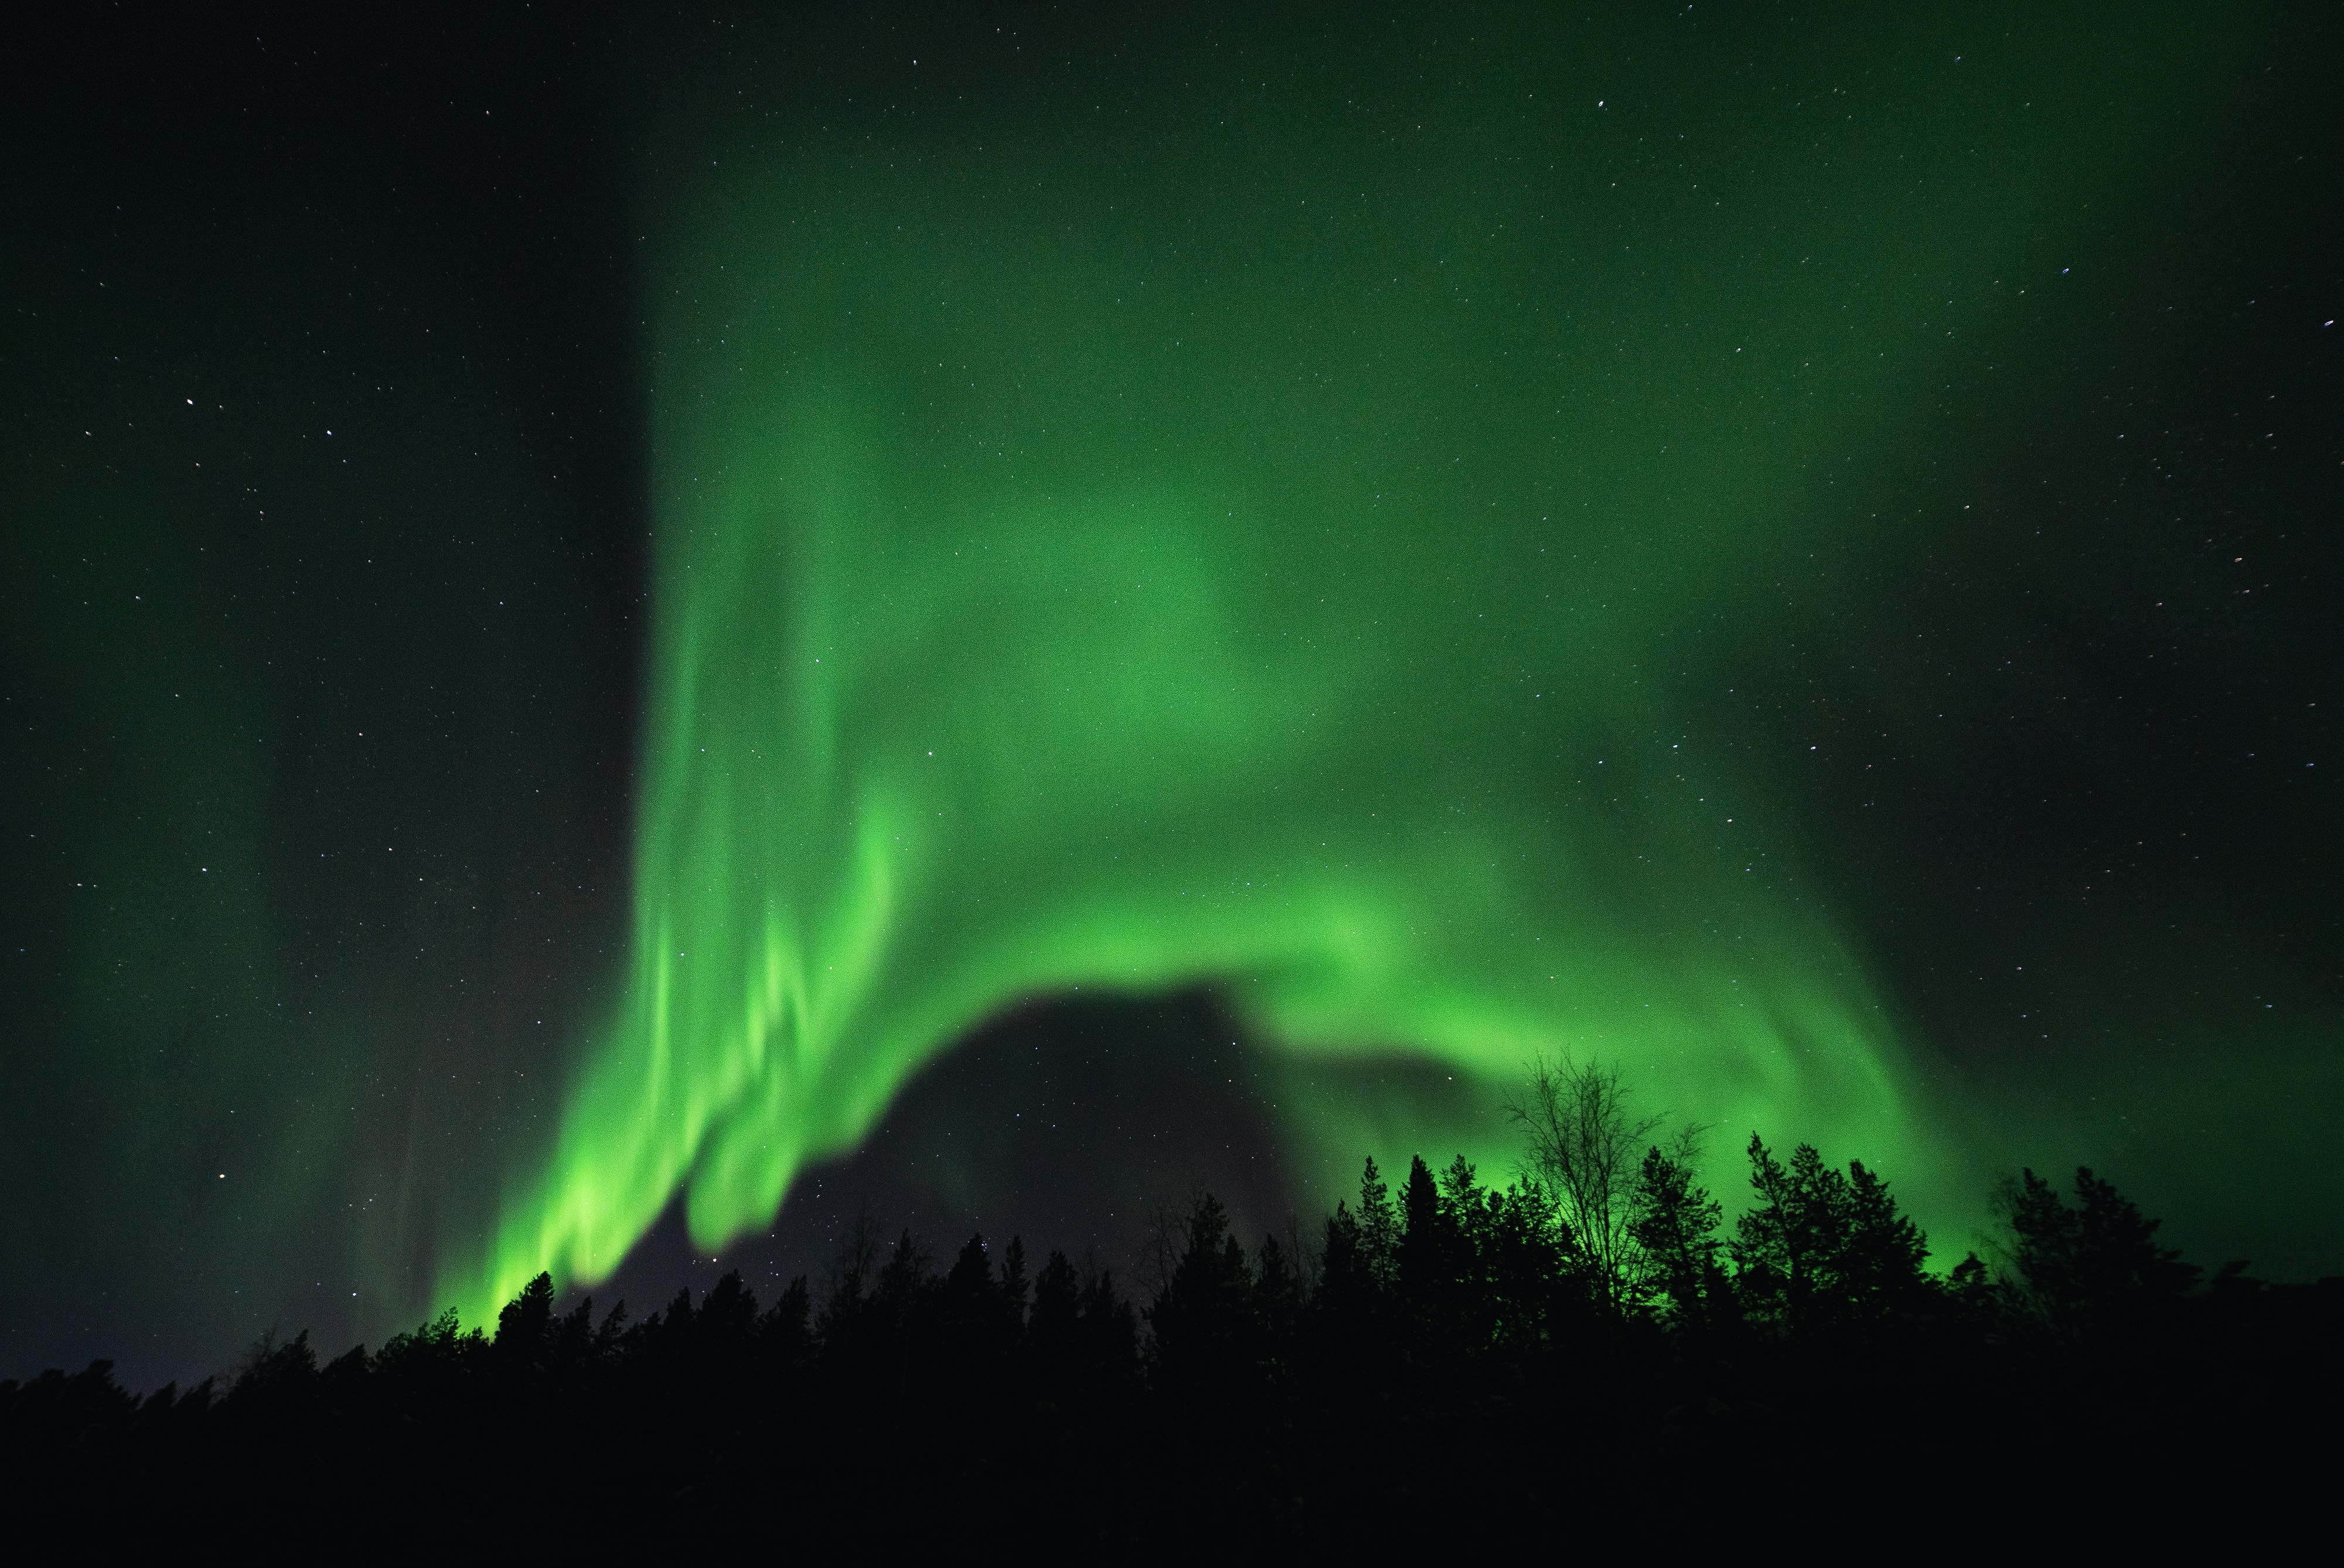 Bright green and curvy northern lights over trees.